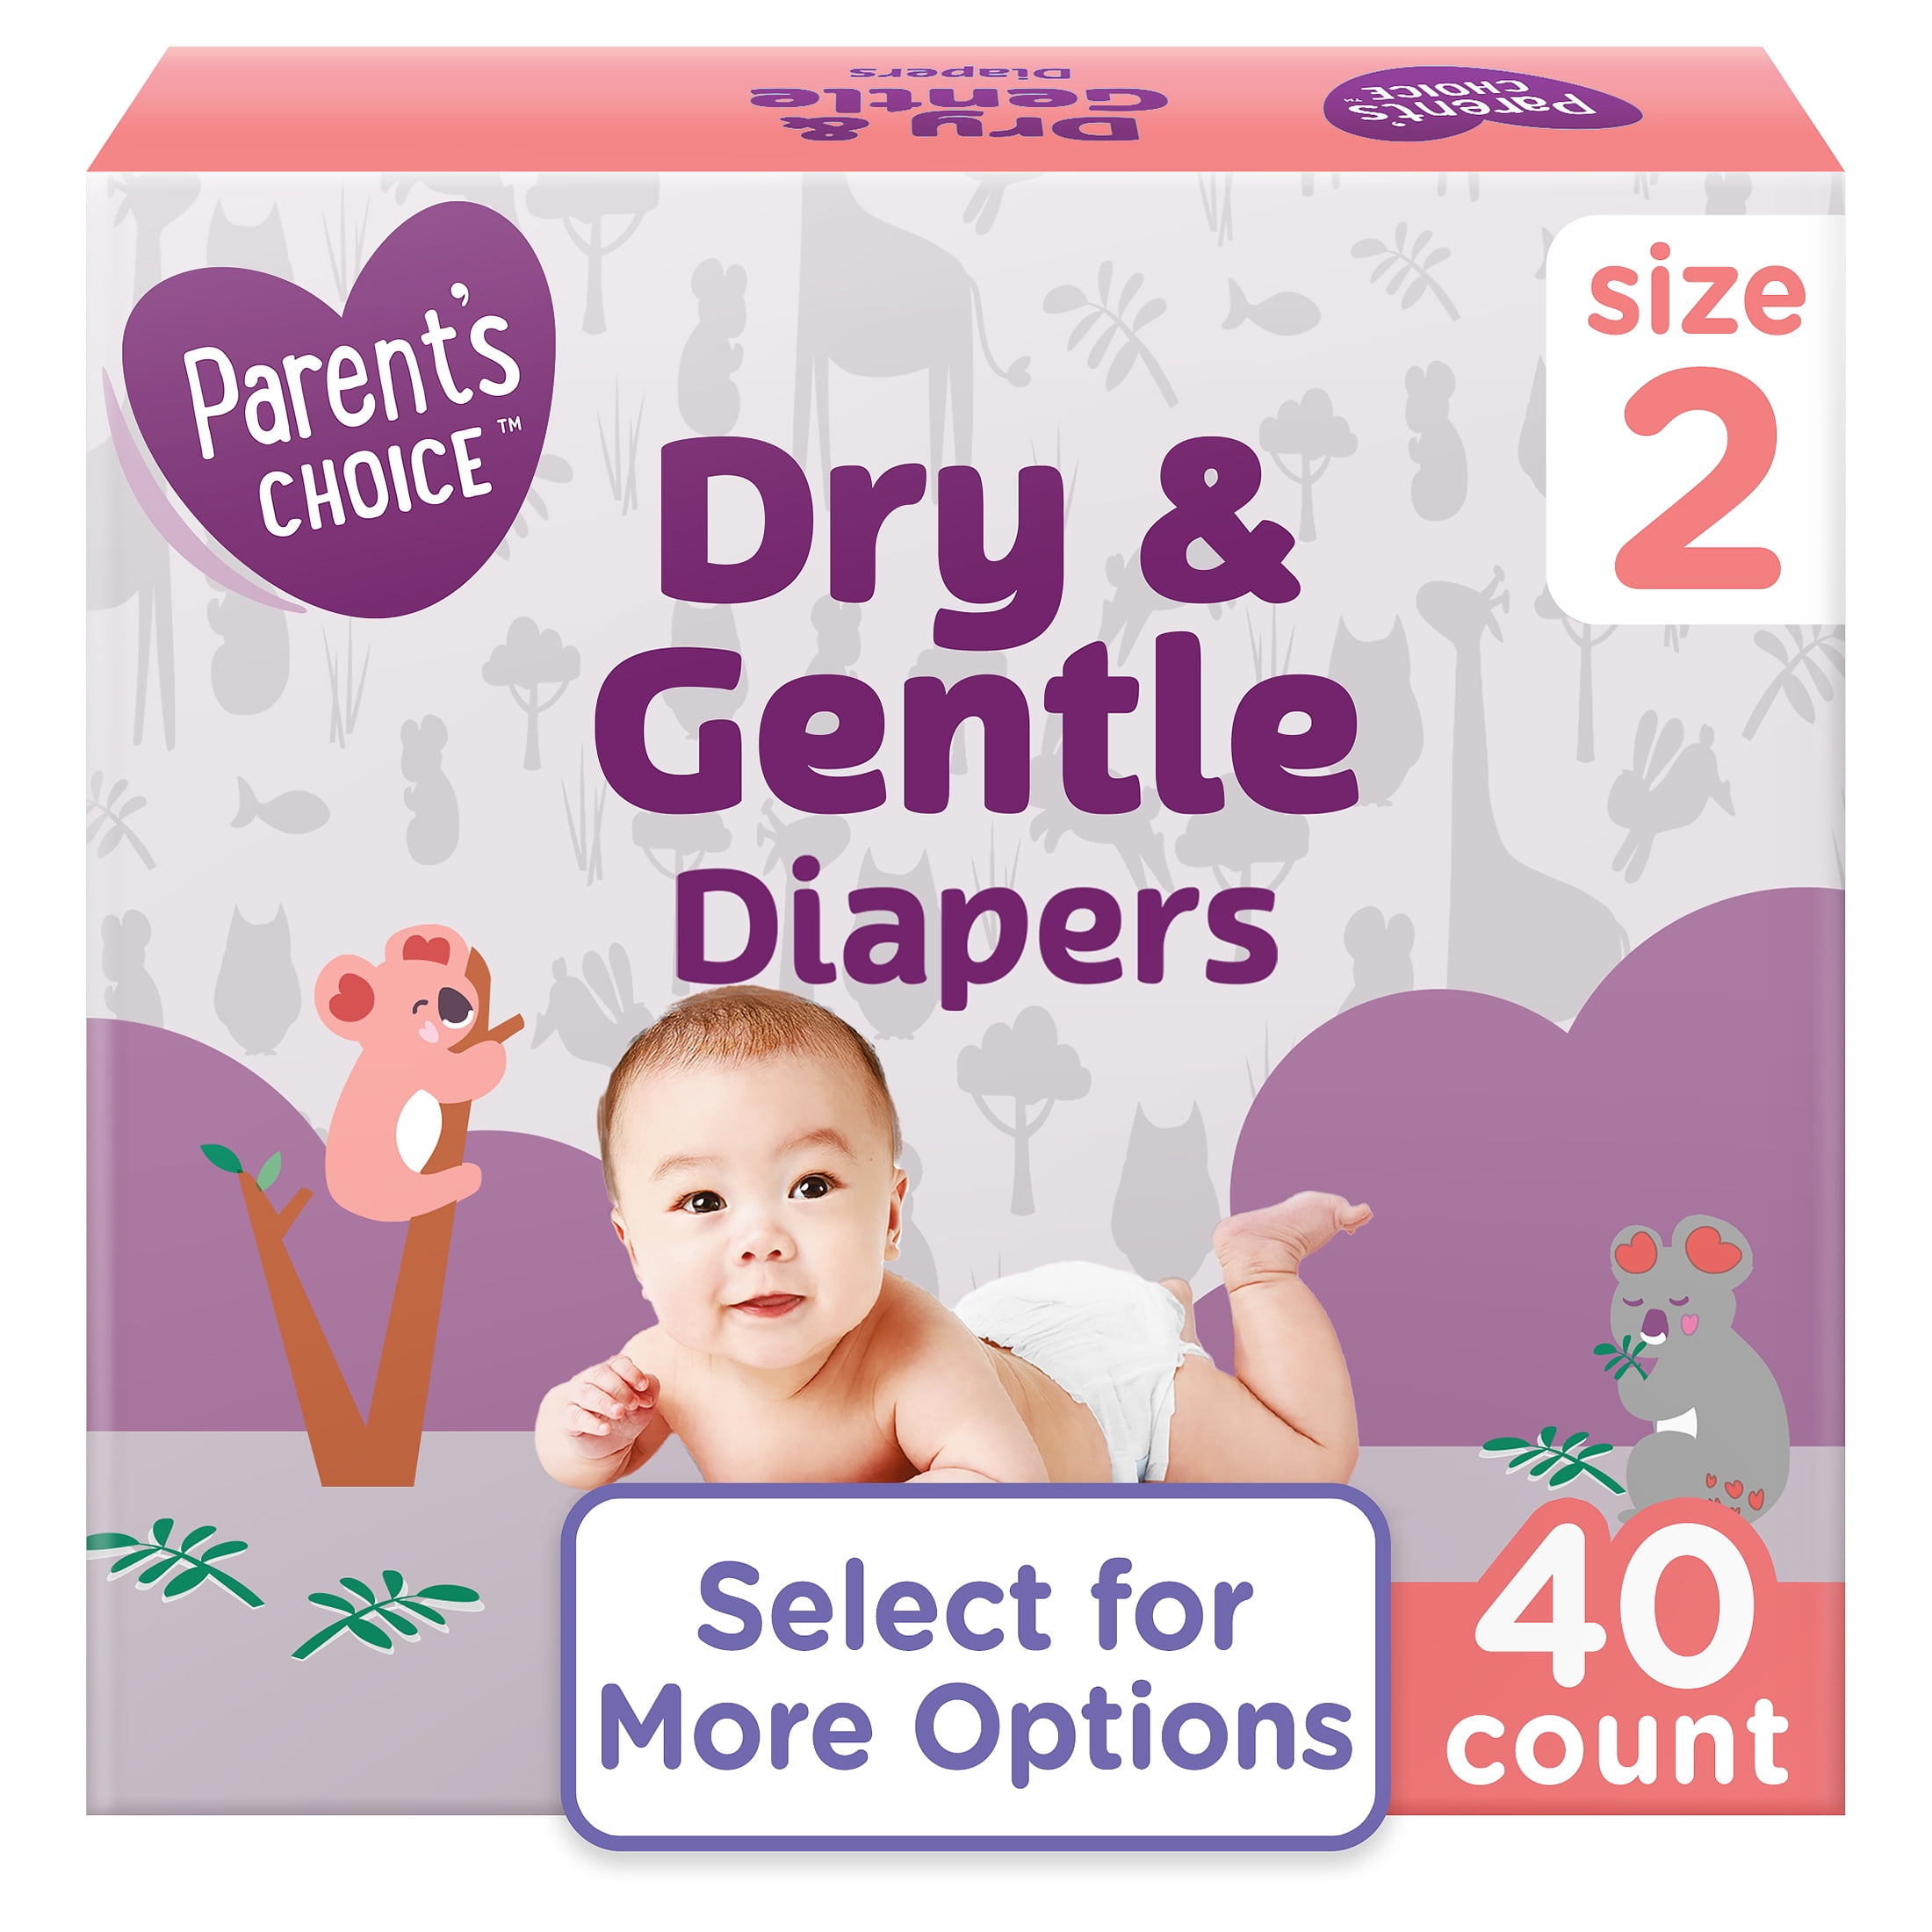 Parent's Choice Dry & Gentle Diapers Size 2, 40 Count (Select for More  Options)